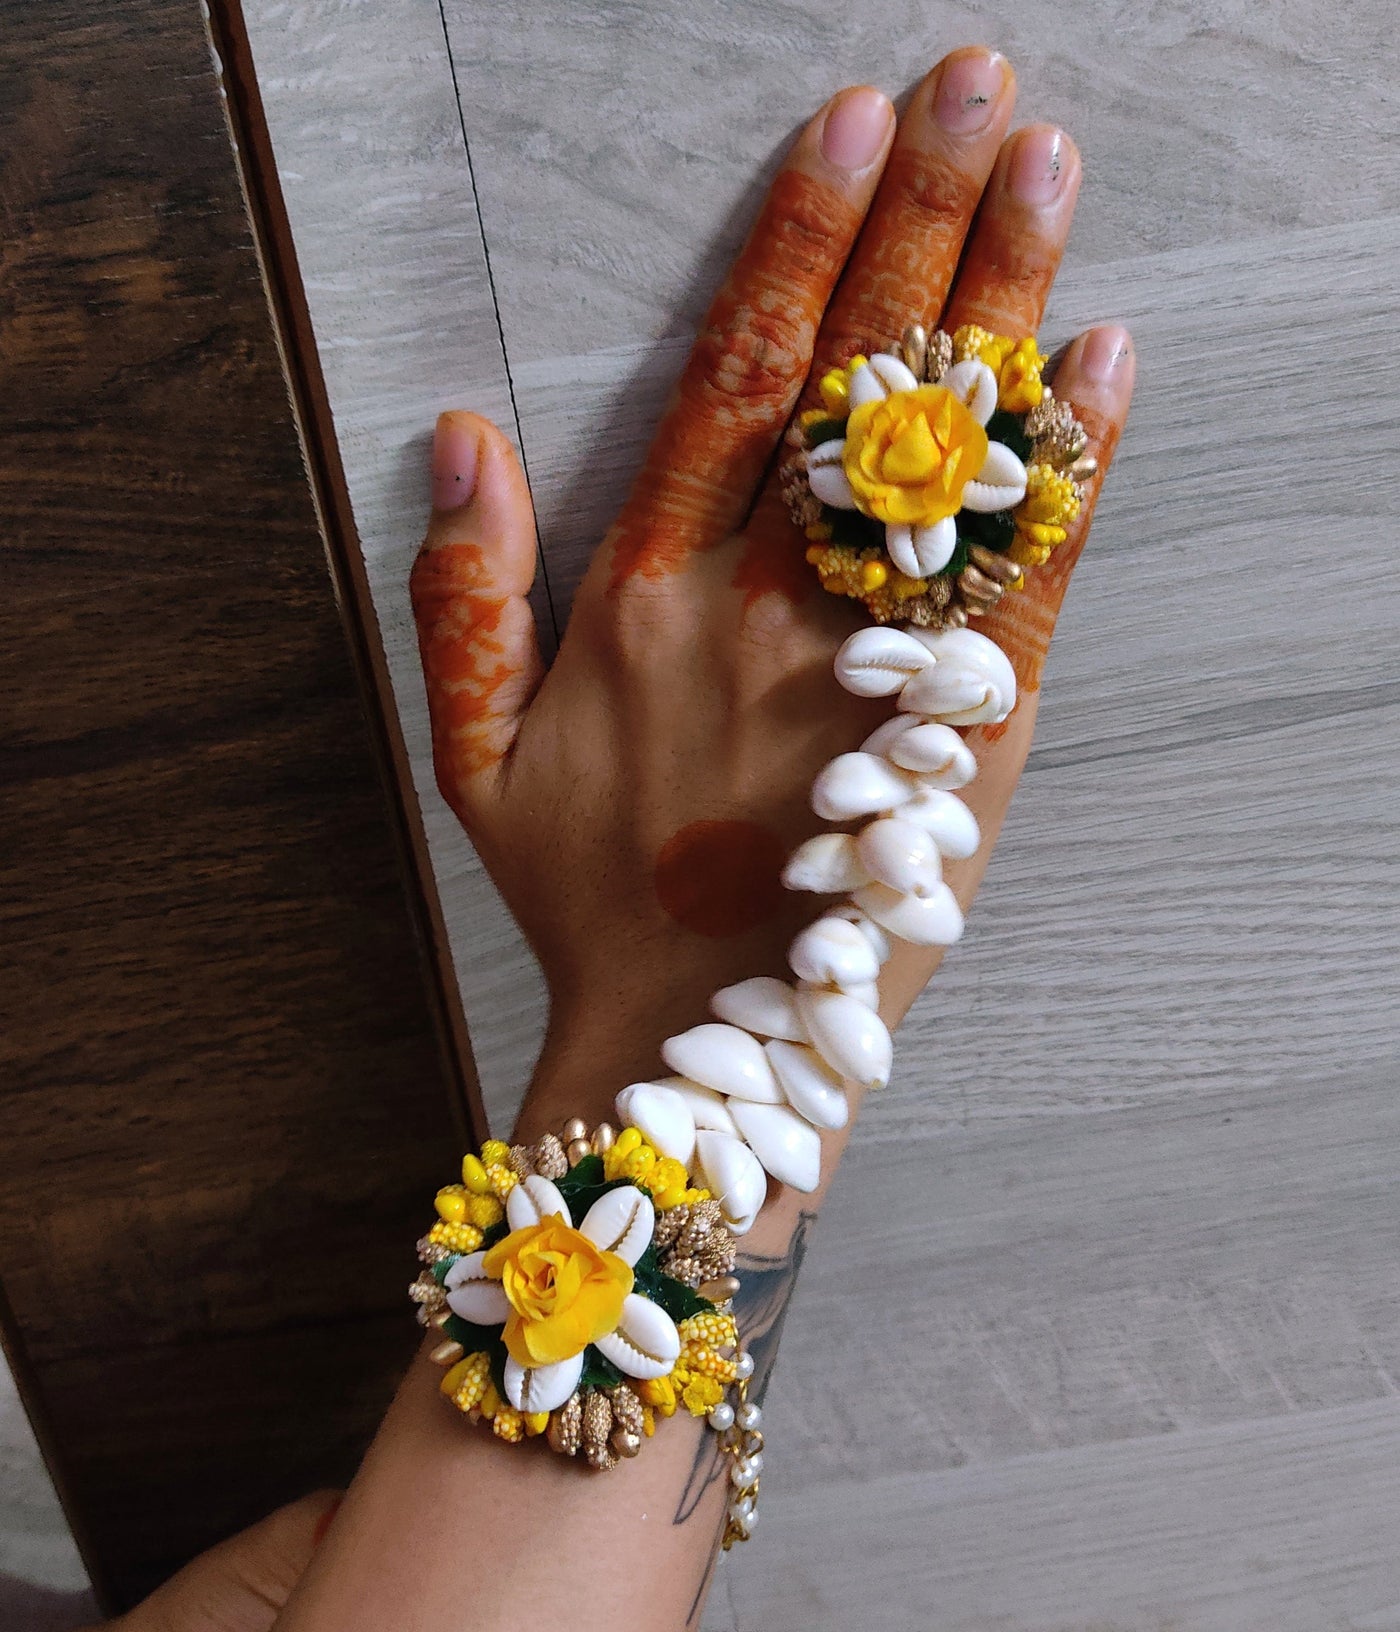 Lamansh Floral 🌺 hathphool Yellow-Gold-White LAMANSH® Shells X Floral 🌸🐚 Hathphool Bracelets Attached with Ring Set for Engagement / Haldi / Floral Accessories set